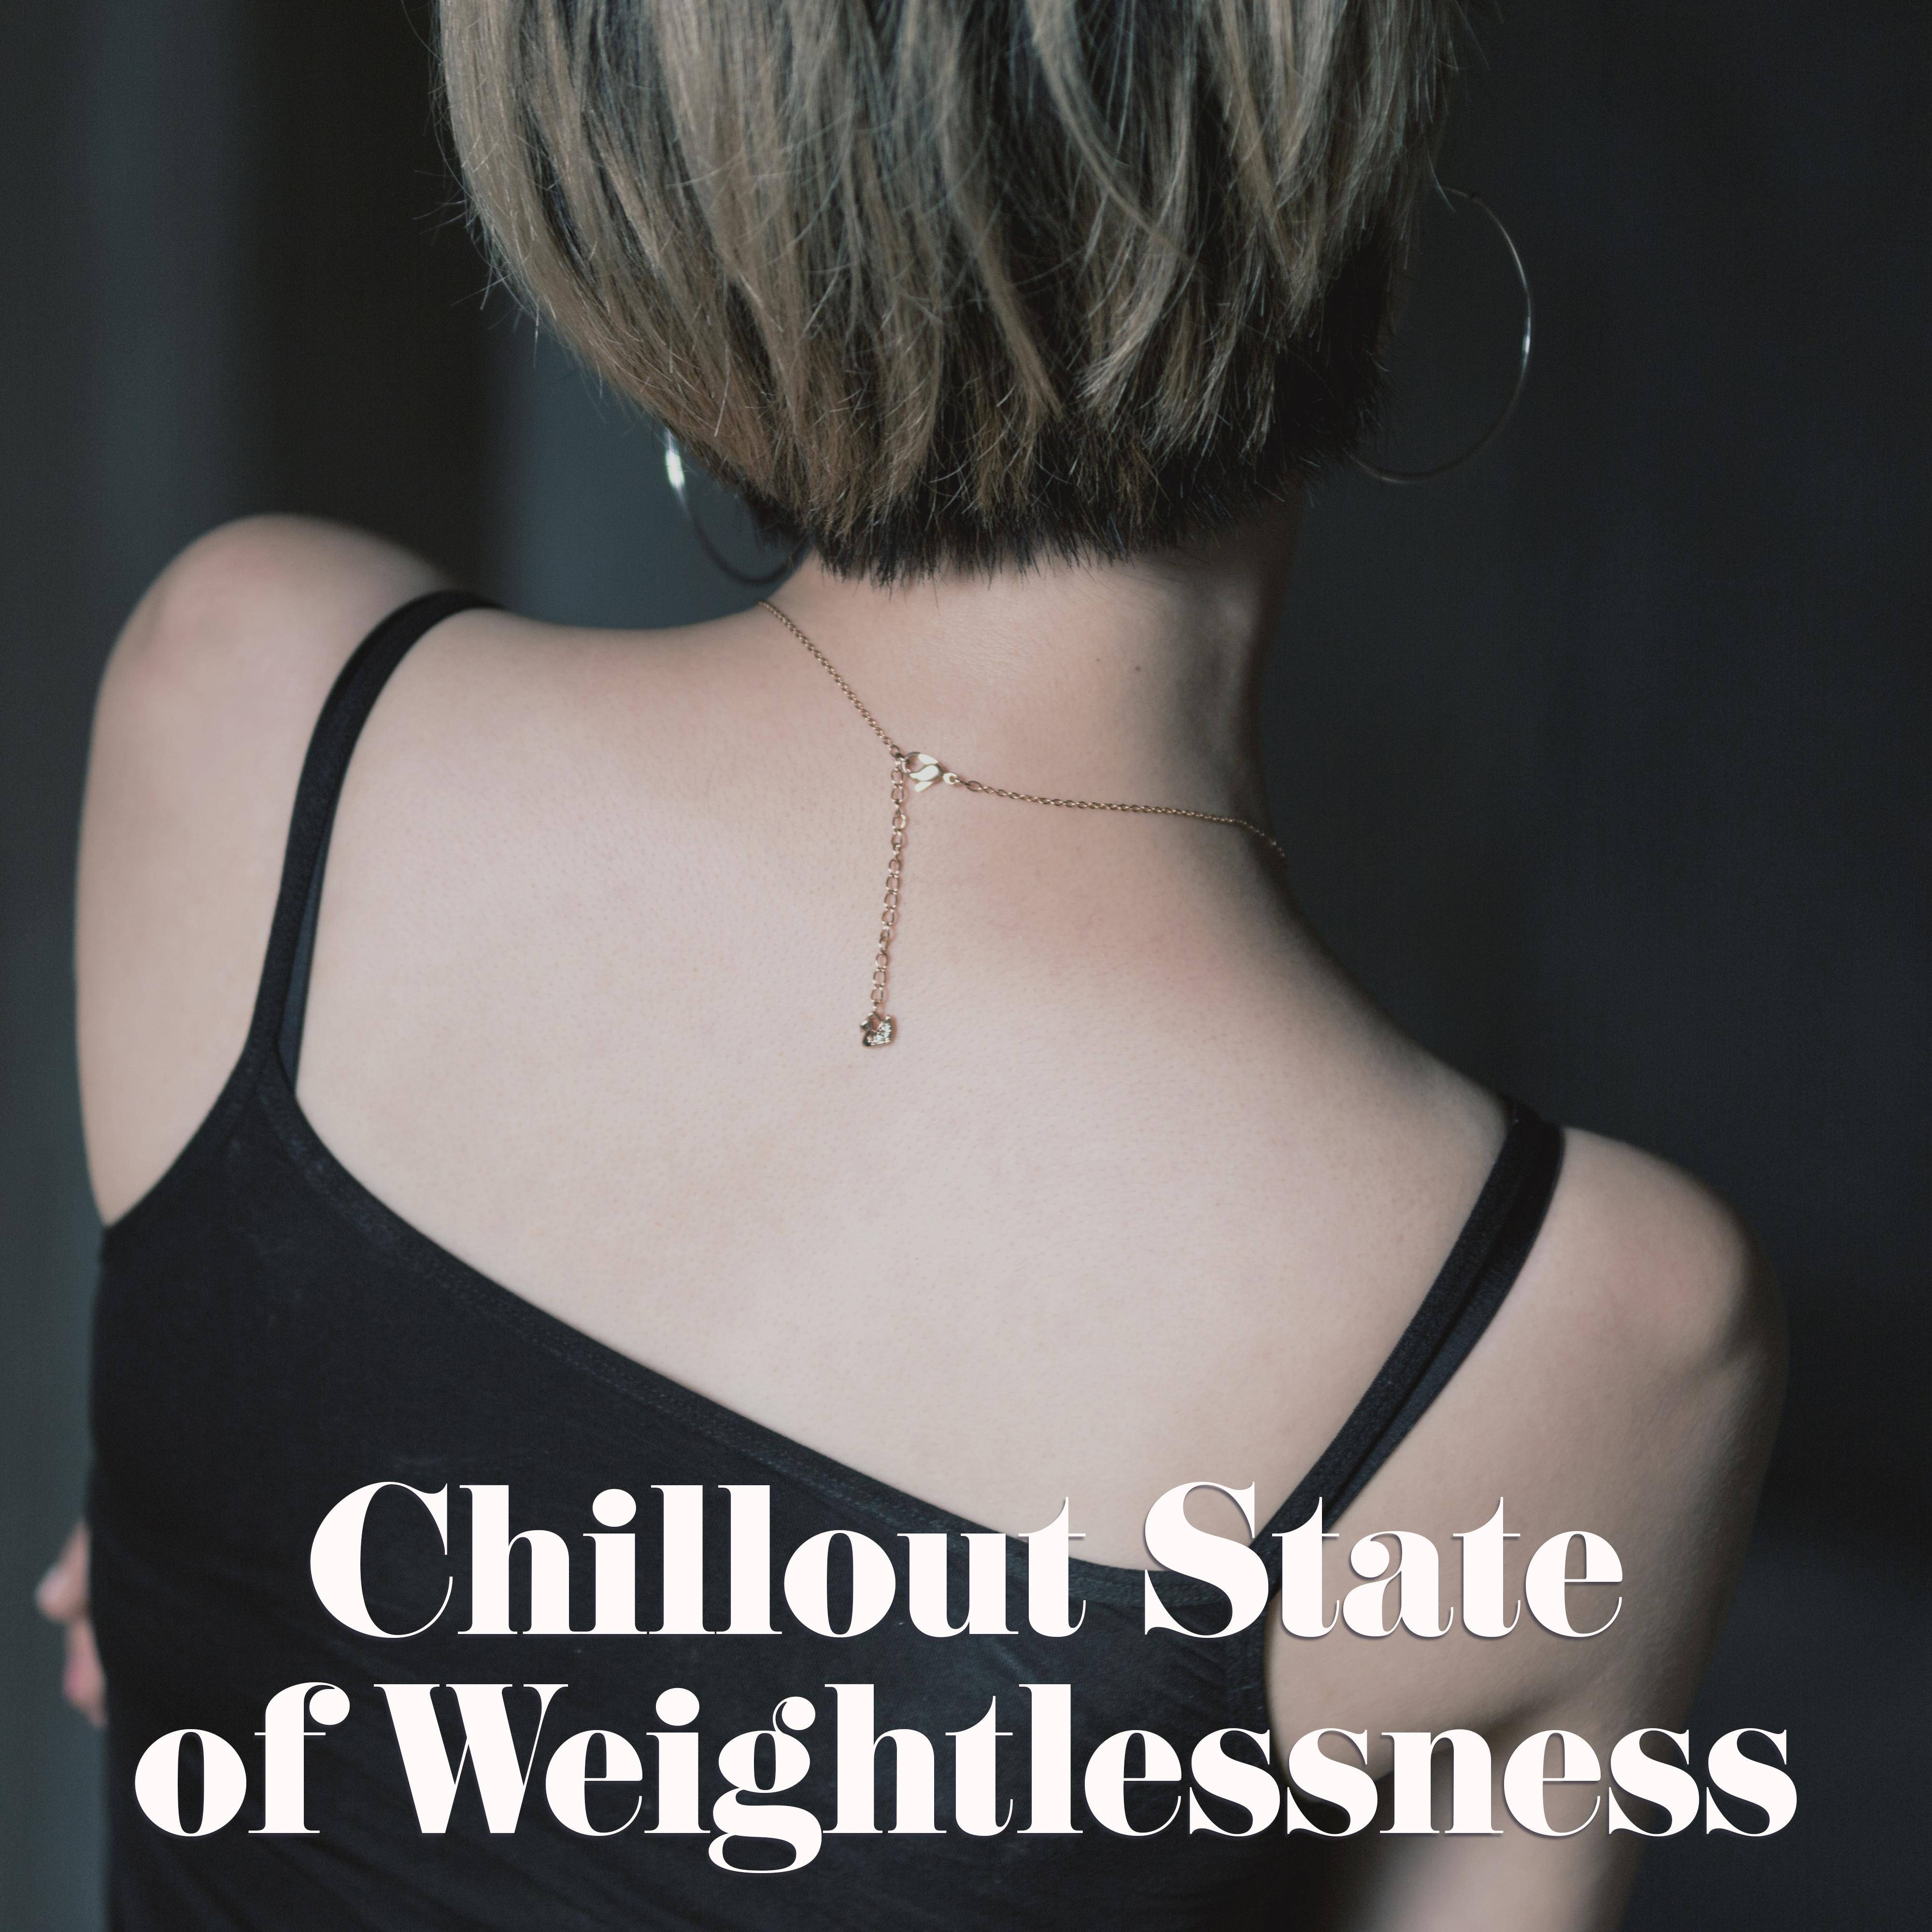 Chillout State of Weightlessness - Light, Relaxing and Calming Music 2019